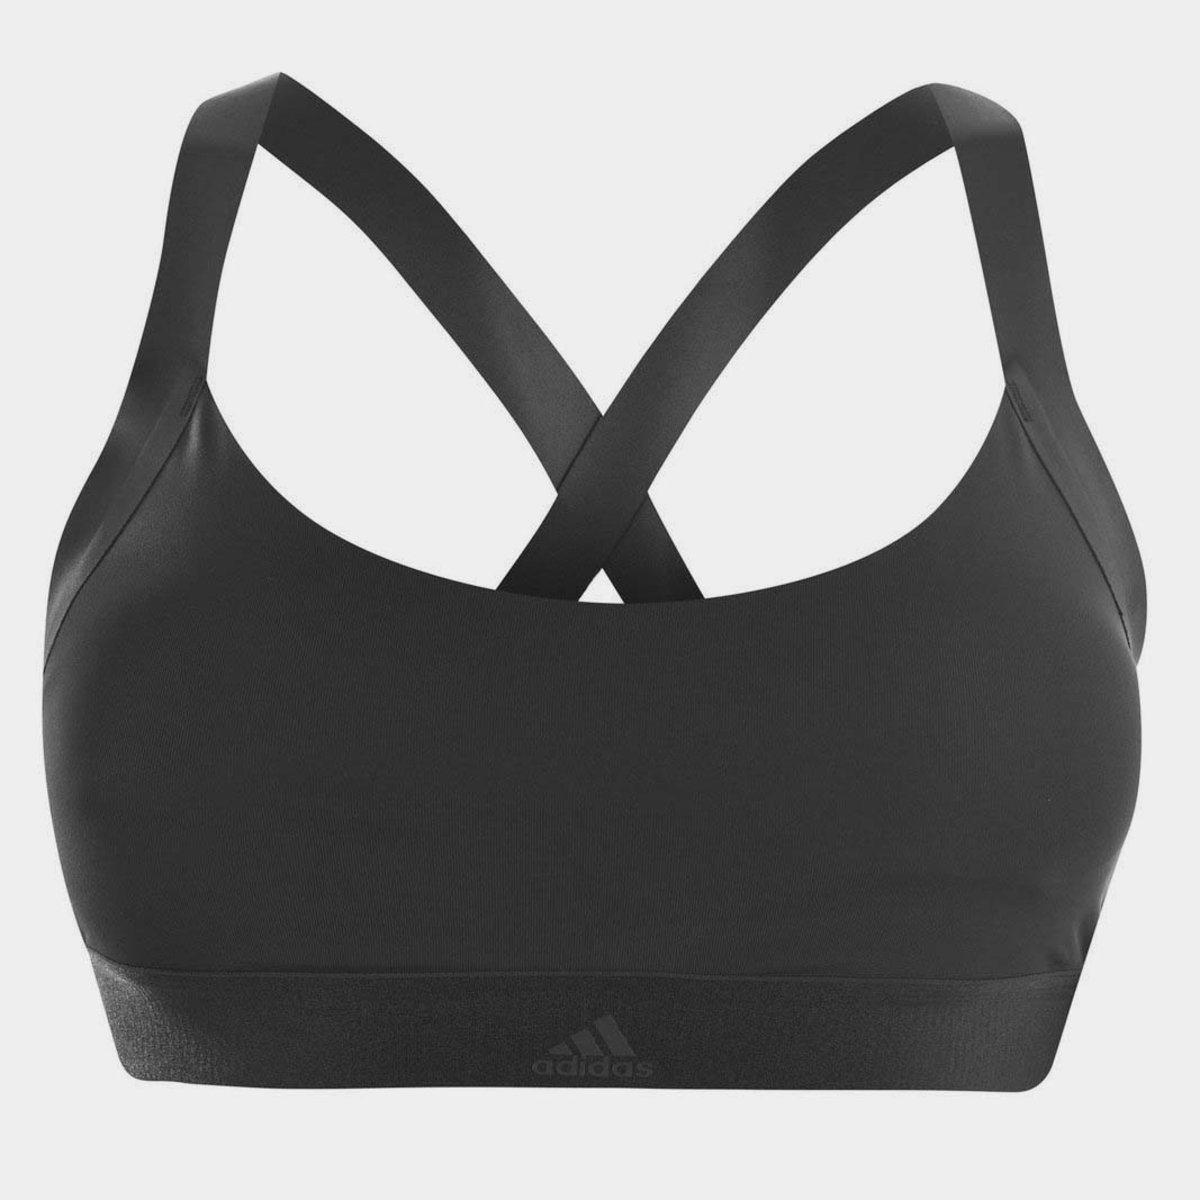 DKNY Sport Women's Performance Support Yoga Running Bra, Black, Large at   Women's Clothing store